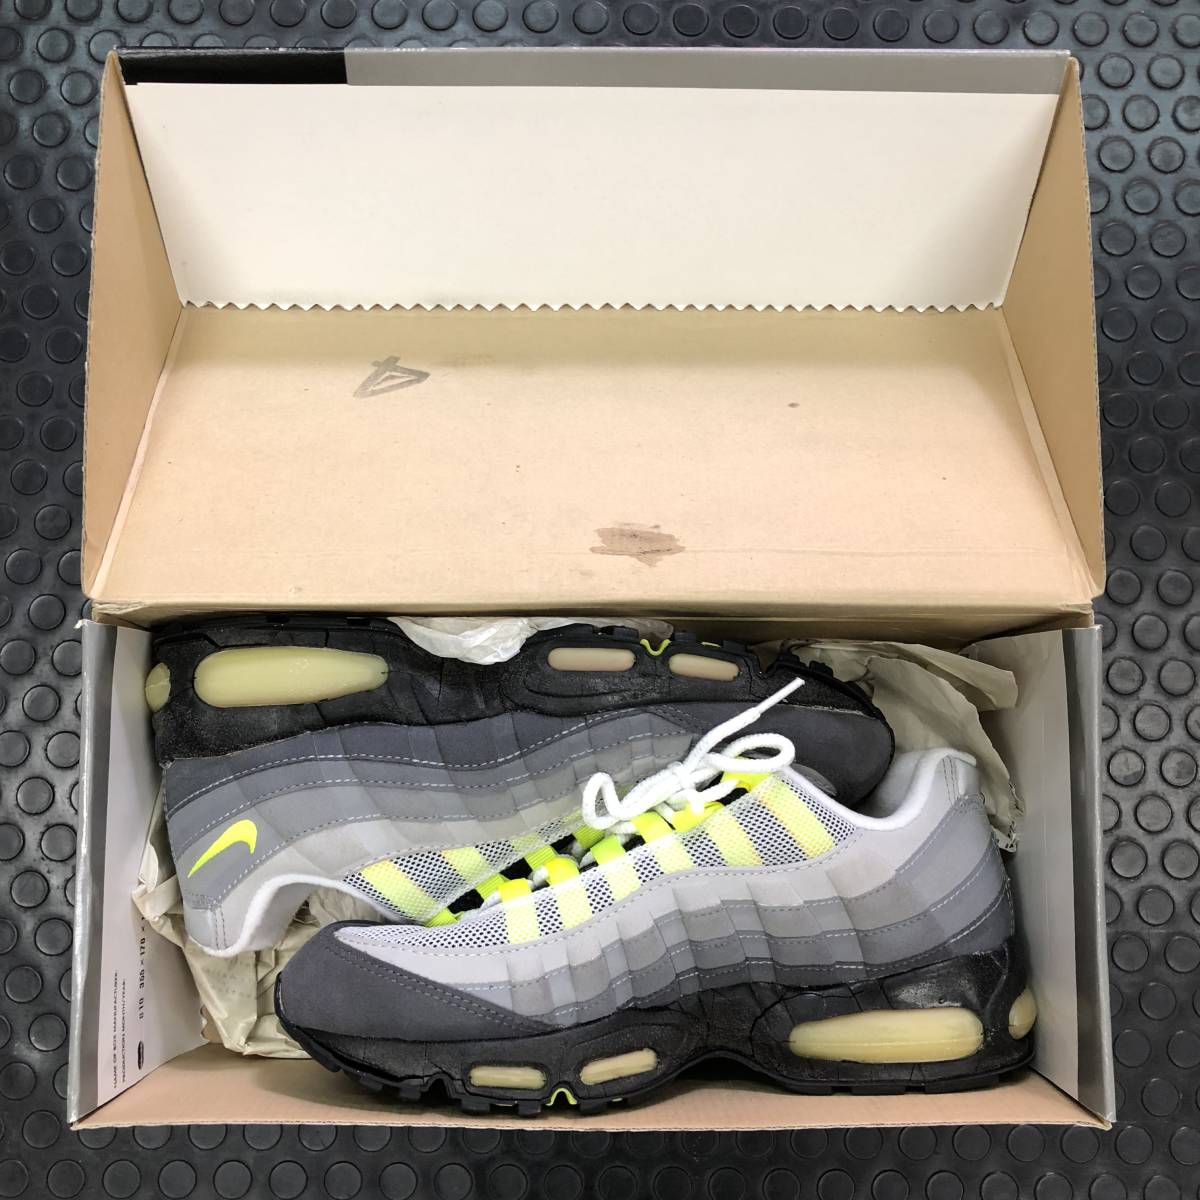  new goods NIKE AIR MAX 95 104050 YELLOW BLUE RED Nike air max yellow blue red original 3 color 27cm. water disassembly box attaching Junk 